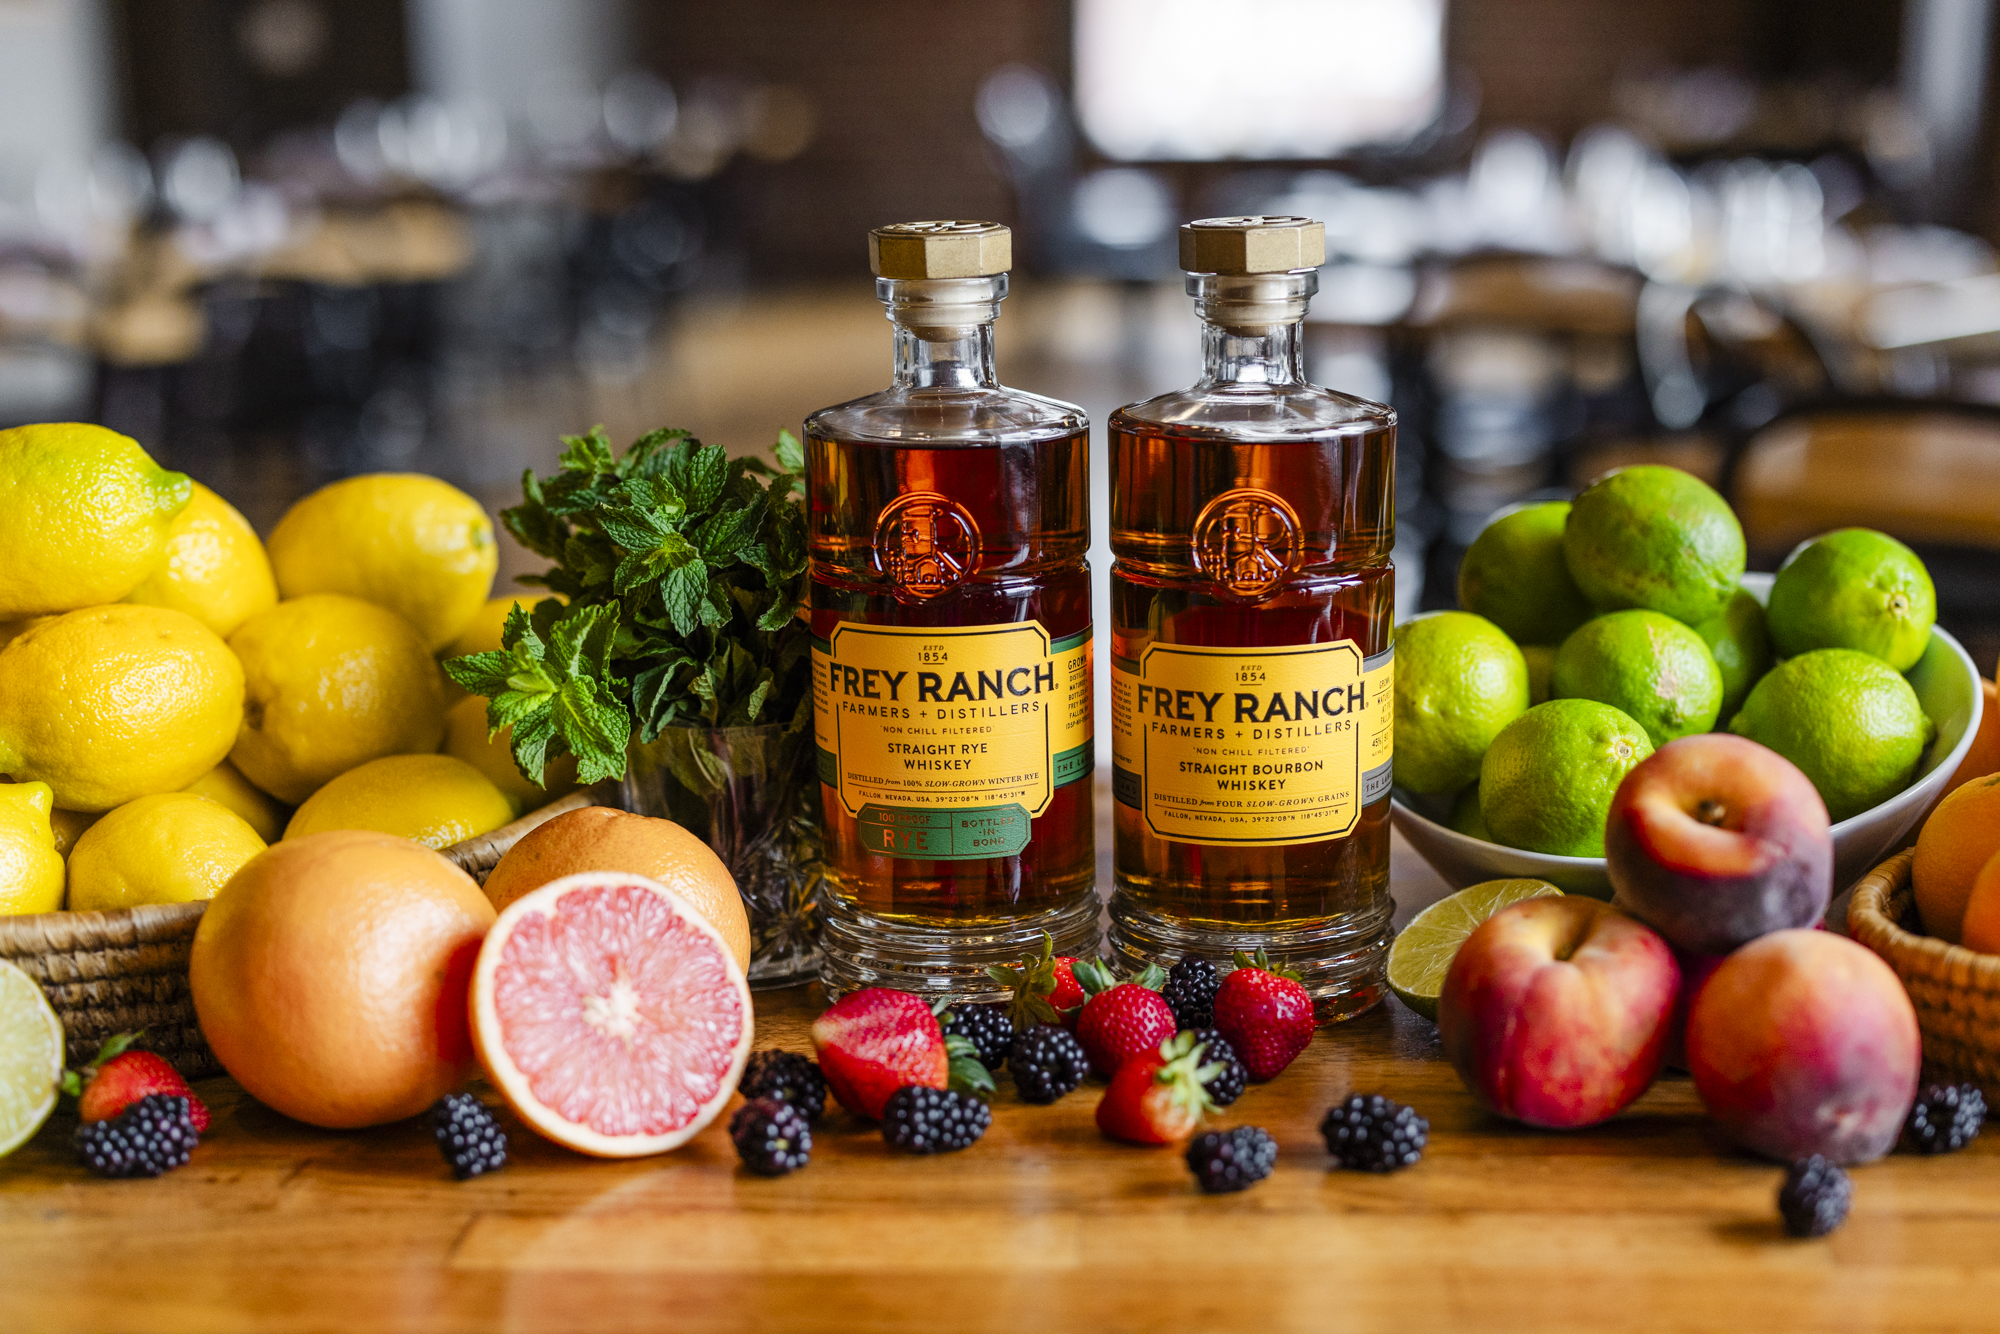 Frey Ranch Announces Inaugural “Farm-to-Glass Month” in April